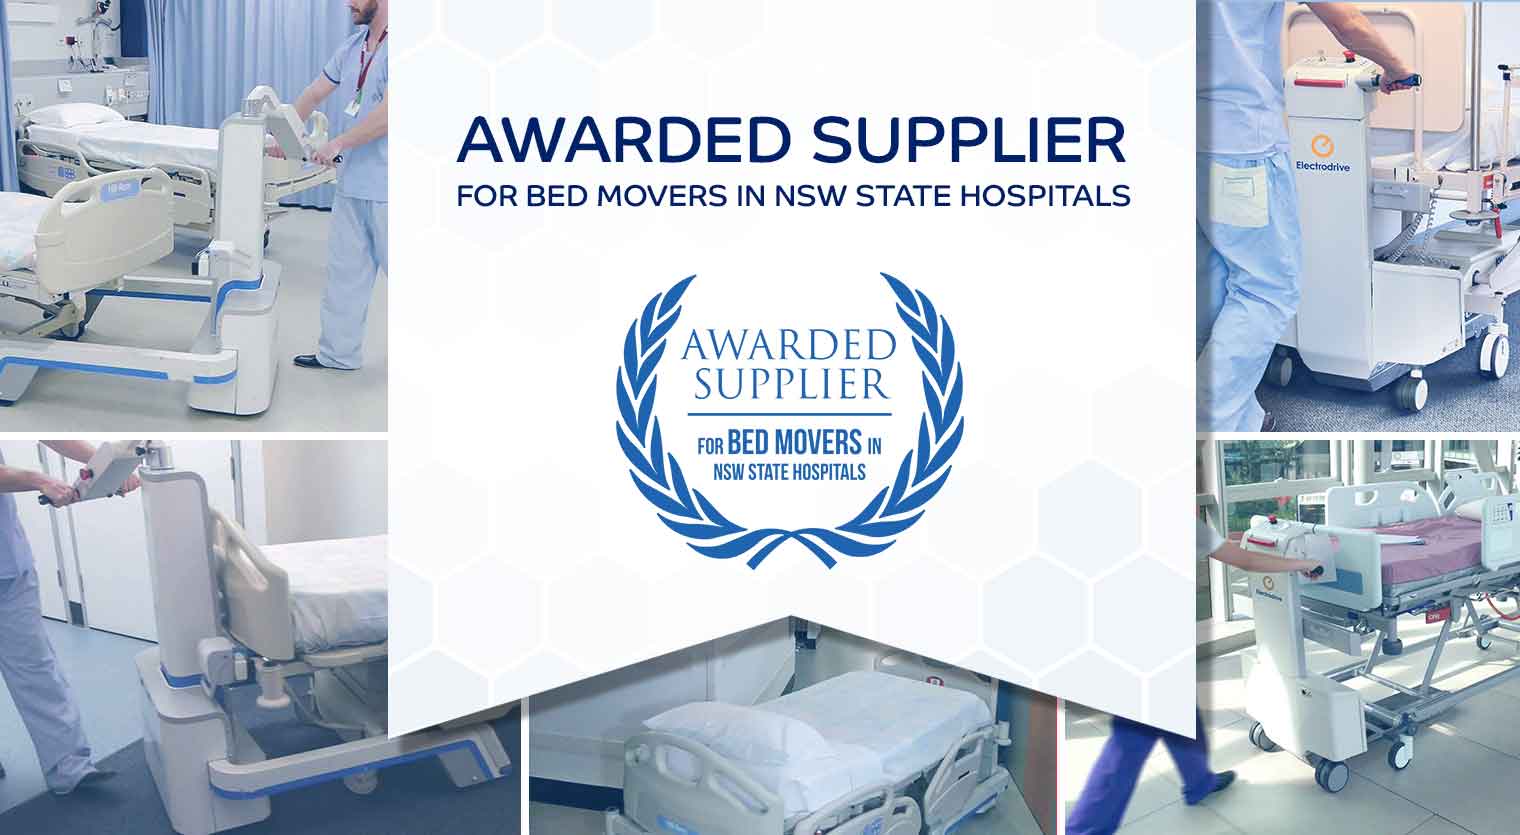 Awarded supplier for bed movers in NSW state hospitals